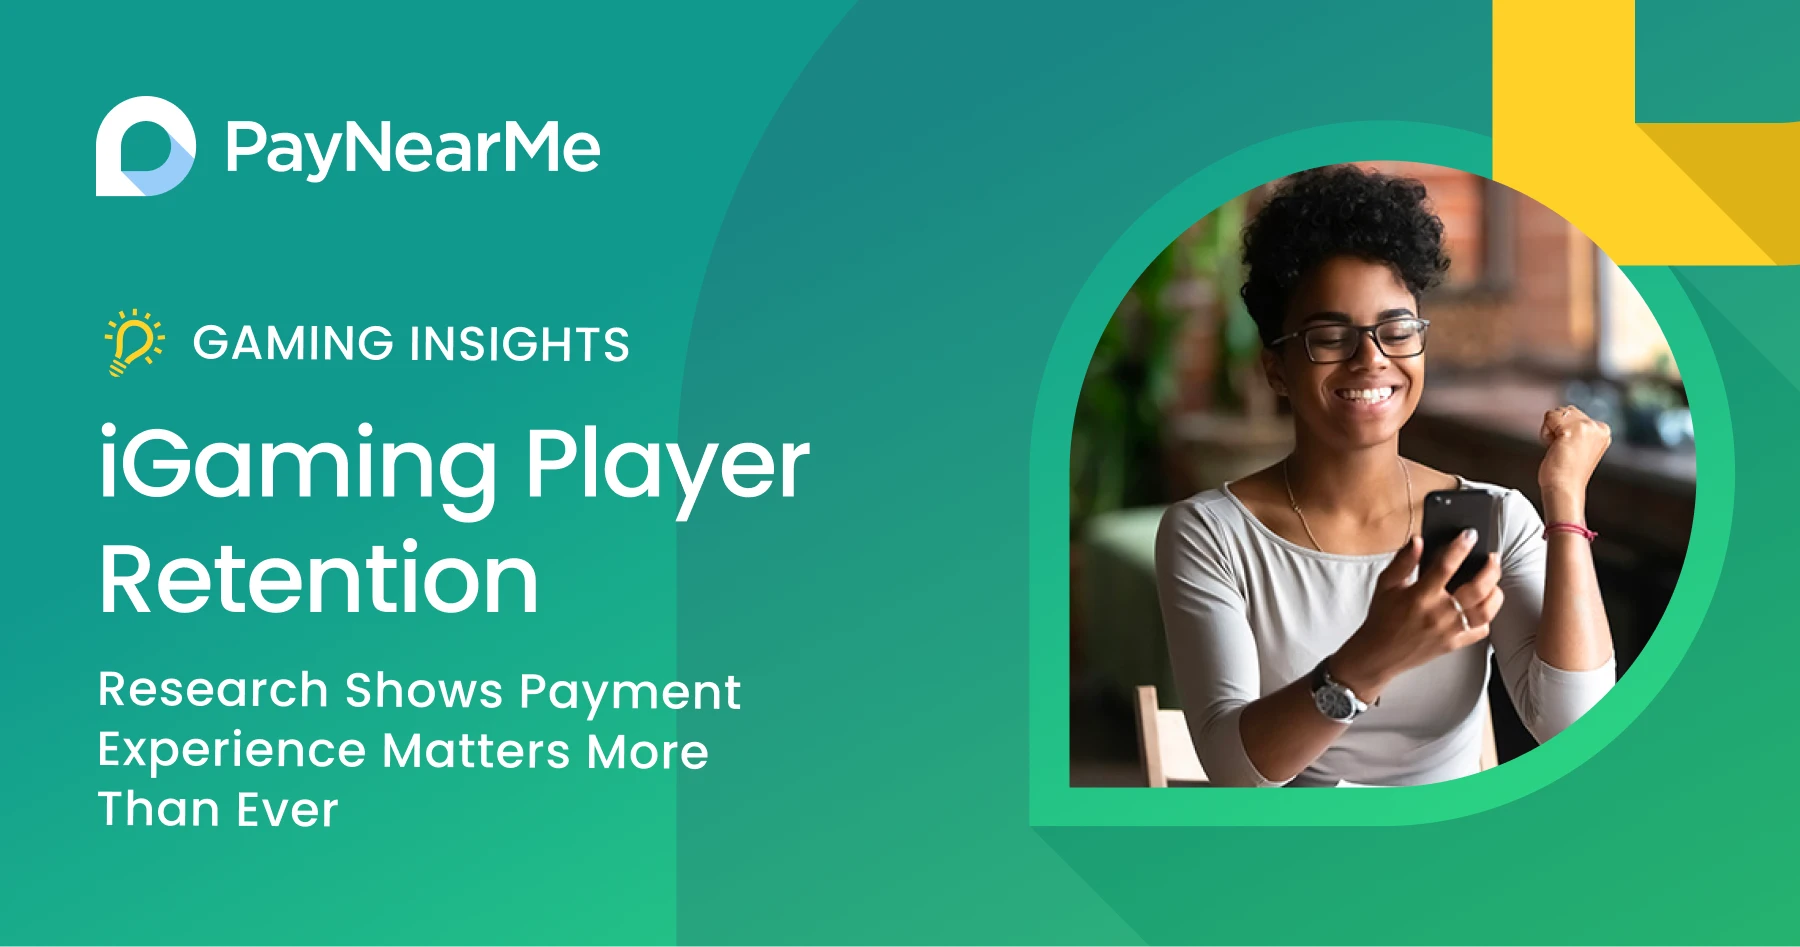 iGaming Player Retention: Research Shows Payment Experience Matters More Than Ever